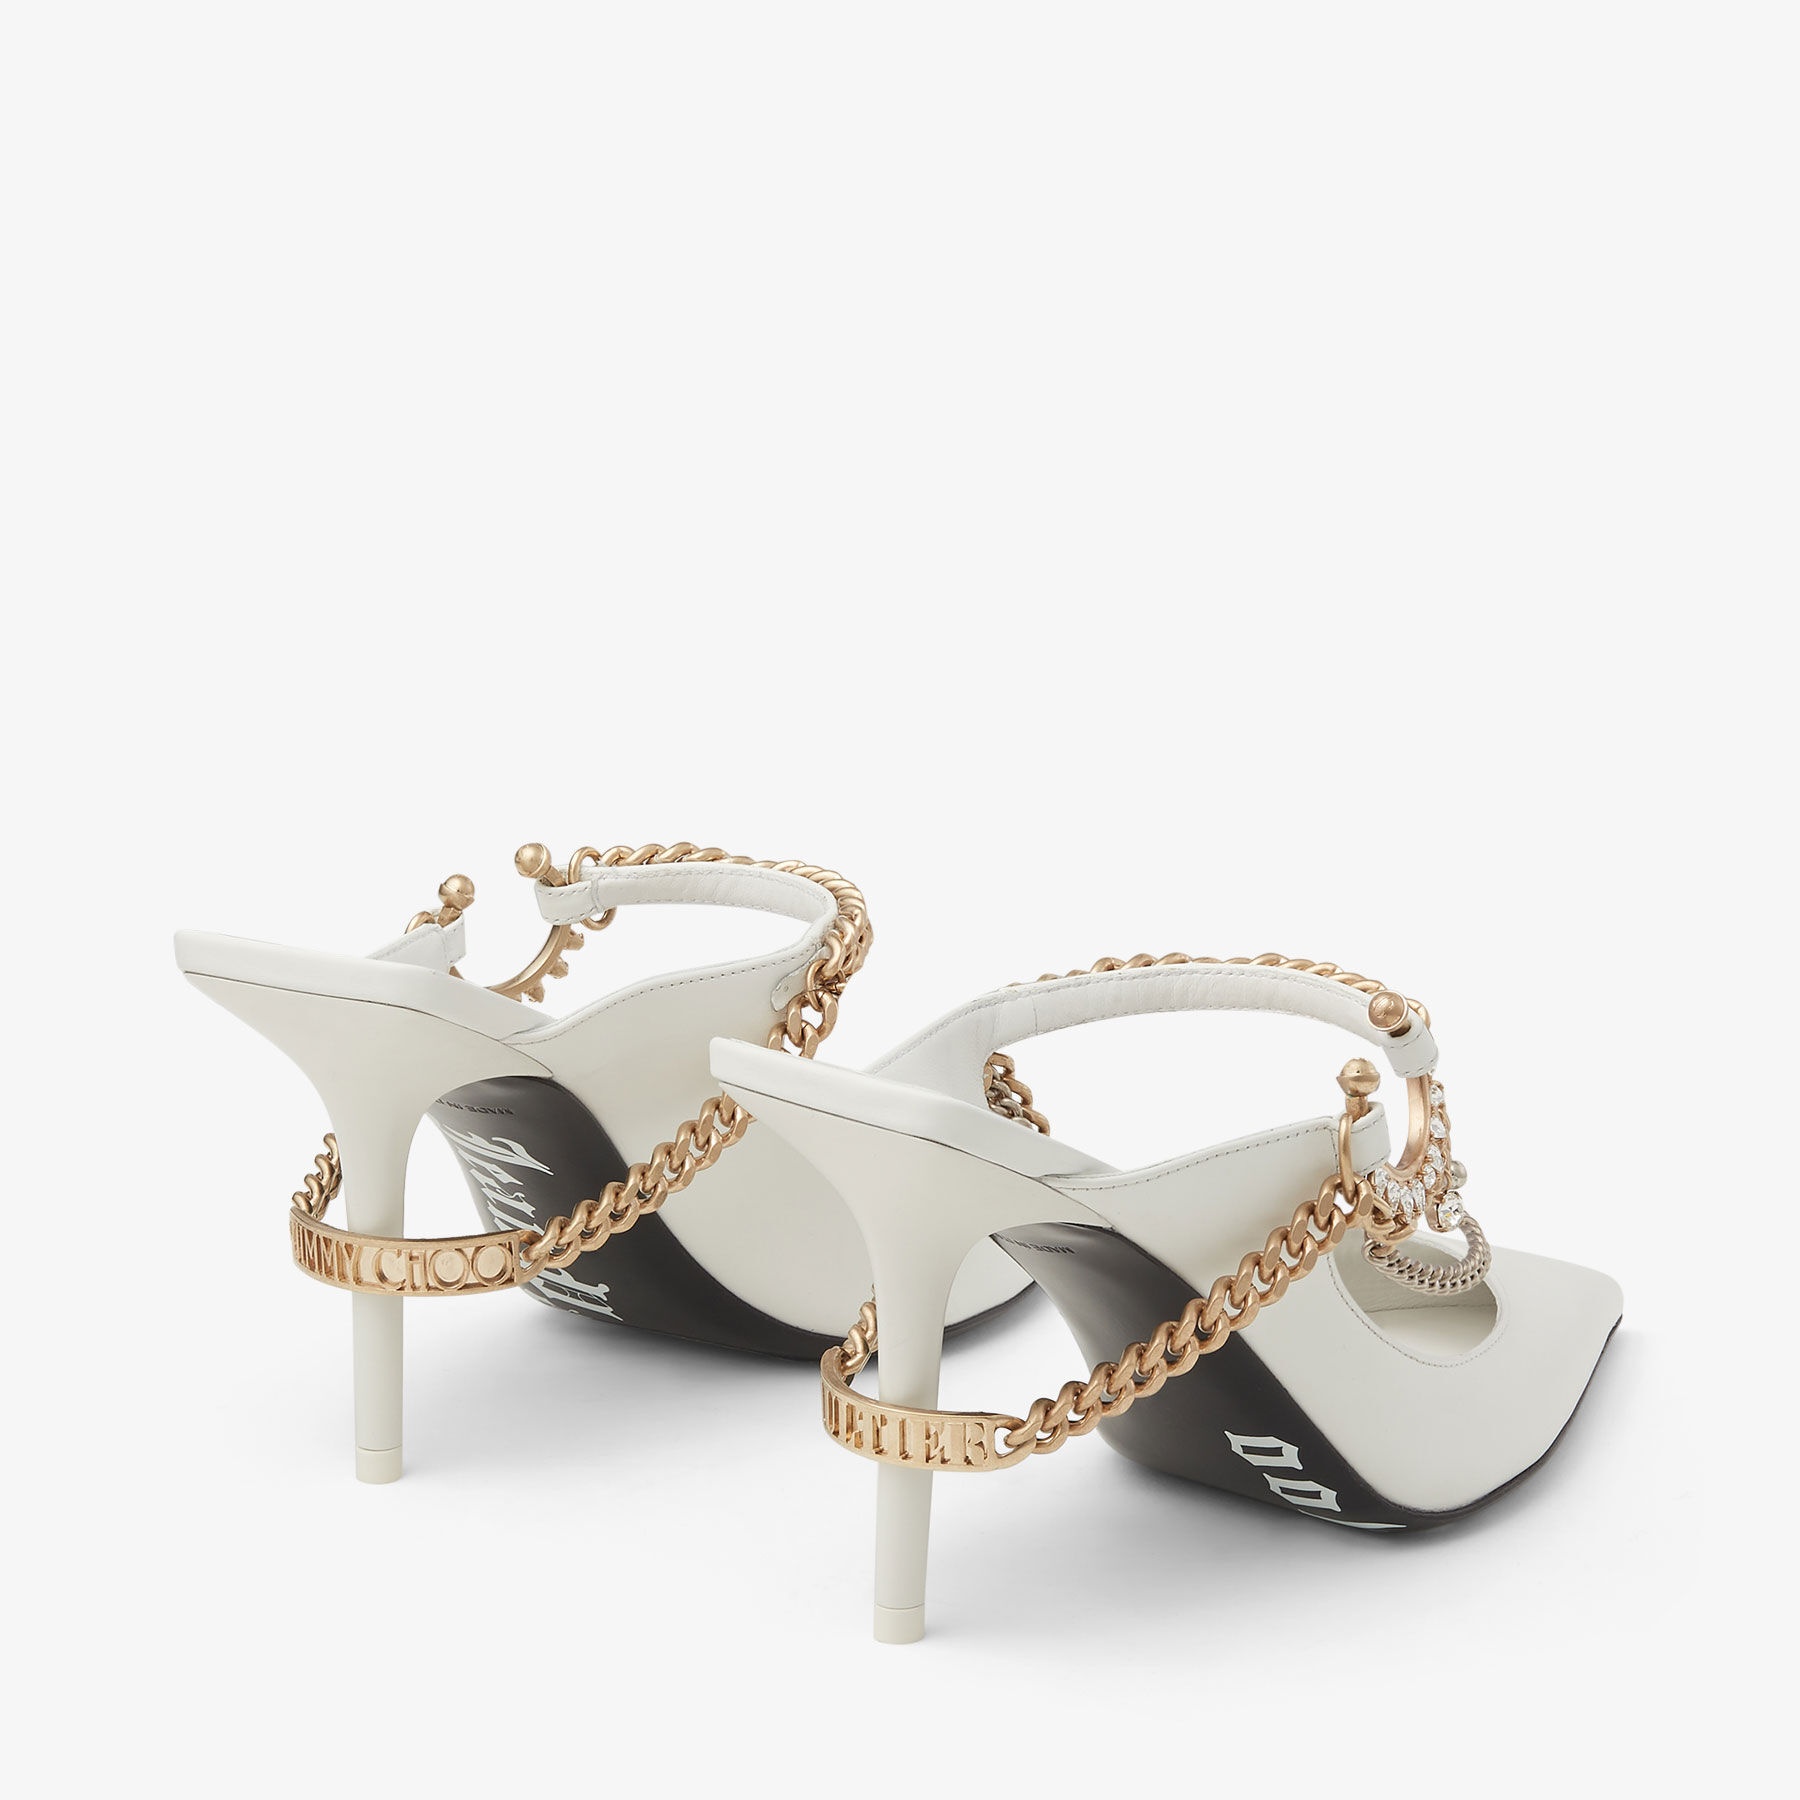 Jimmy Choo / Jean Paul Gaultier Bing 90
Optical White Calf Leather Mules with Jewellery - 7